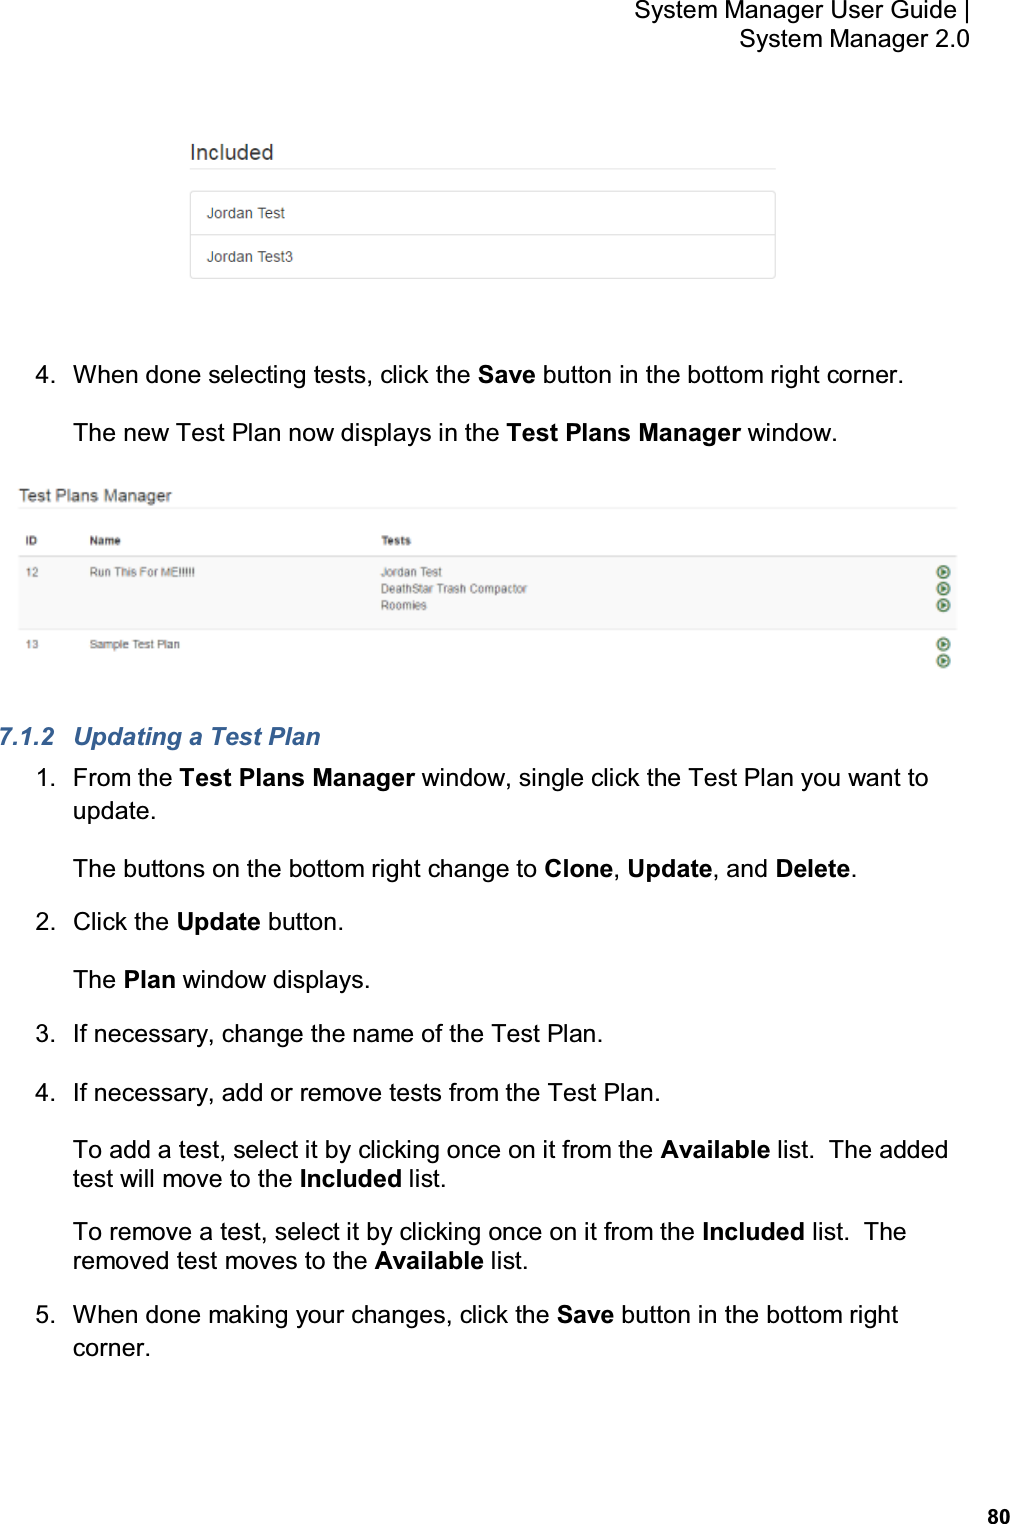           80 System Manager User Guide |  System Manager 2.0  4.  When done selecting tests, click the Save button in the bottom right corner. The new Test Plan now displays in the Test Plans Manager window.  7.1.2  Updating a Test Plan 1.  From the Test Plans Manager window, single click the Test Plan you want to update. The buttons on the bottom right change to Clone, Update, and Delete. 2.  Click the Update button. The Plan window displays. 3.  If necessary, change the name of the Test Plan. 4.  If necessary, add or remove tests from the Test Plan. To add a test, select it by clicking once on it from the Available list.  The added test will move to the Included list. To remove a test, select it by clicking once on it from the Included list.  The removed test moves to the Available list. 5.  When done making your changes, click the Save button in the bottom right corner. 